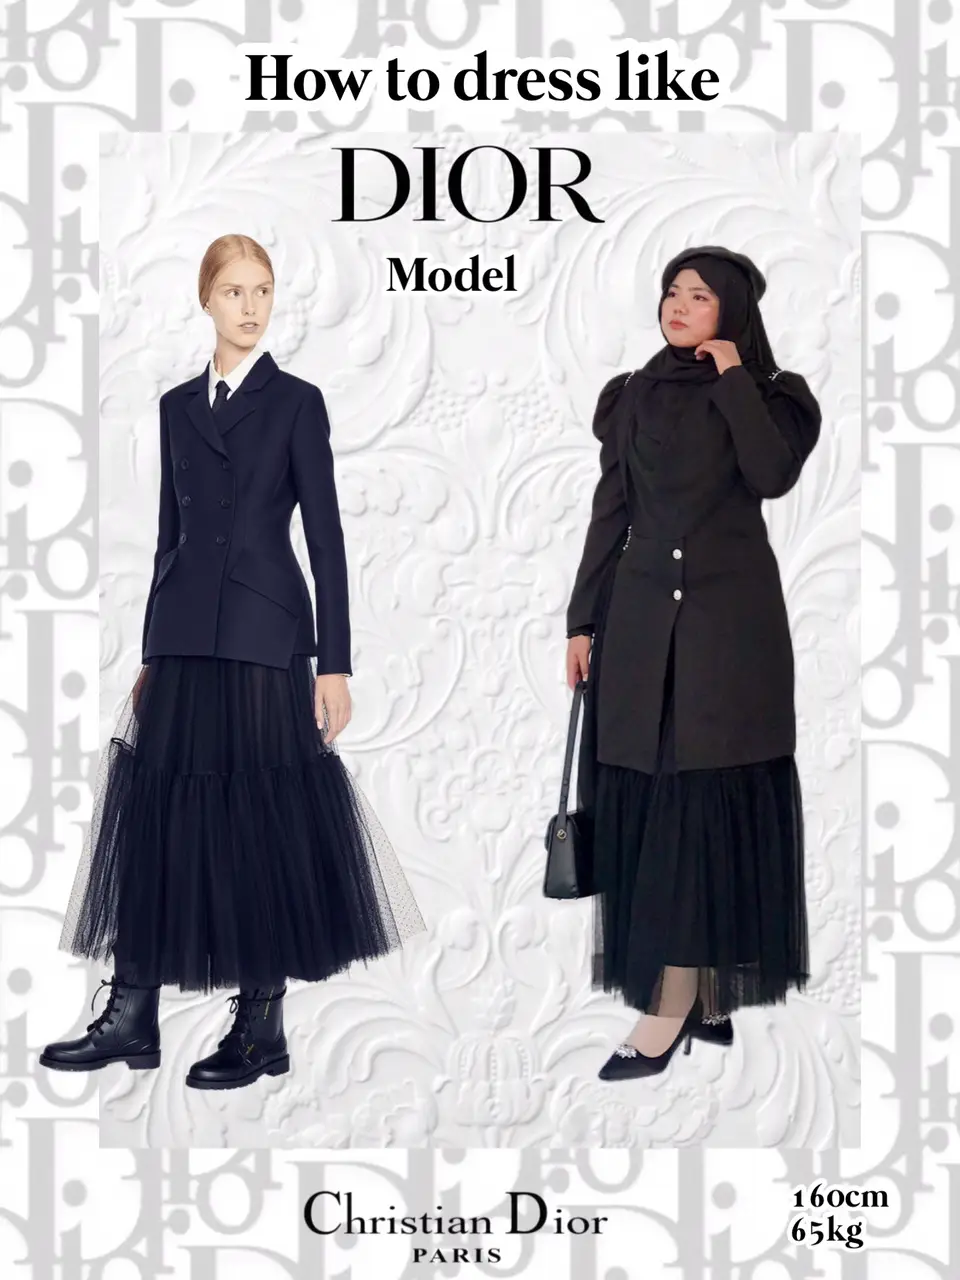 How to Wear Dior 3 Ways: Dior Outfits From Influencer Iga Wysocka